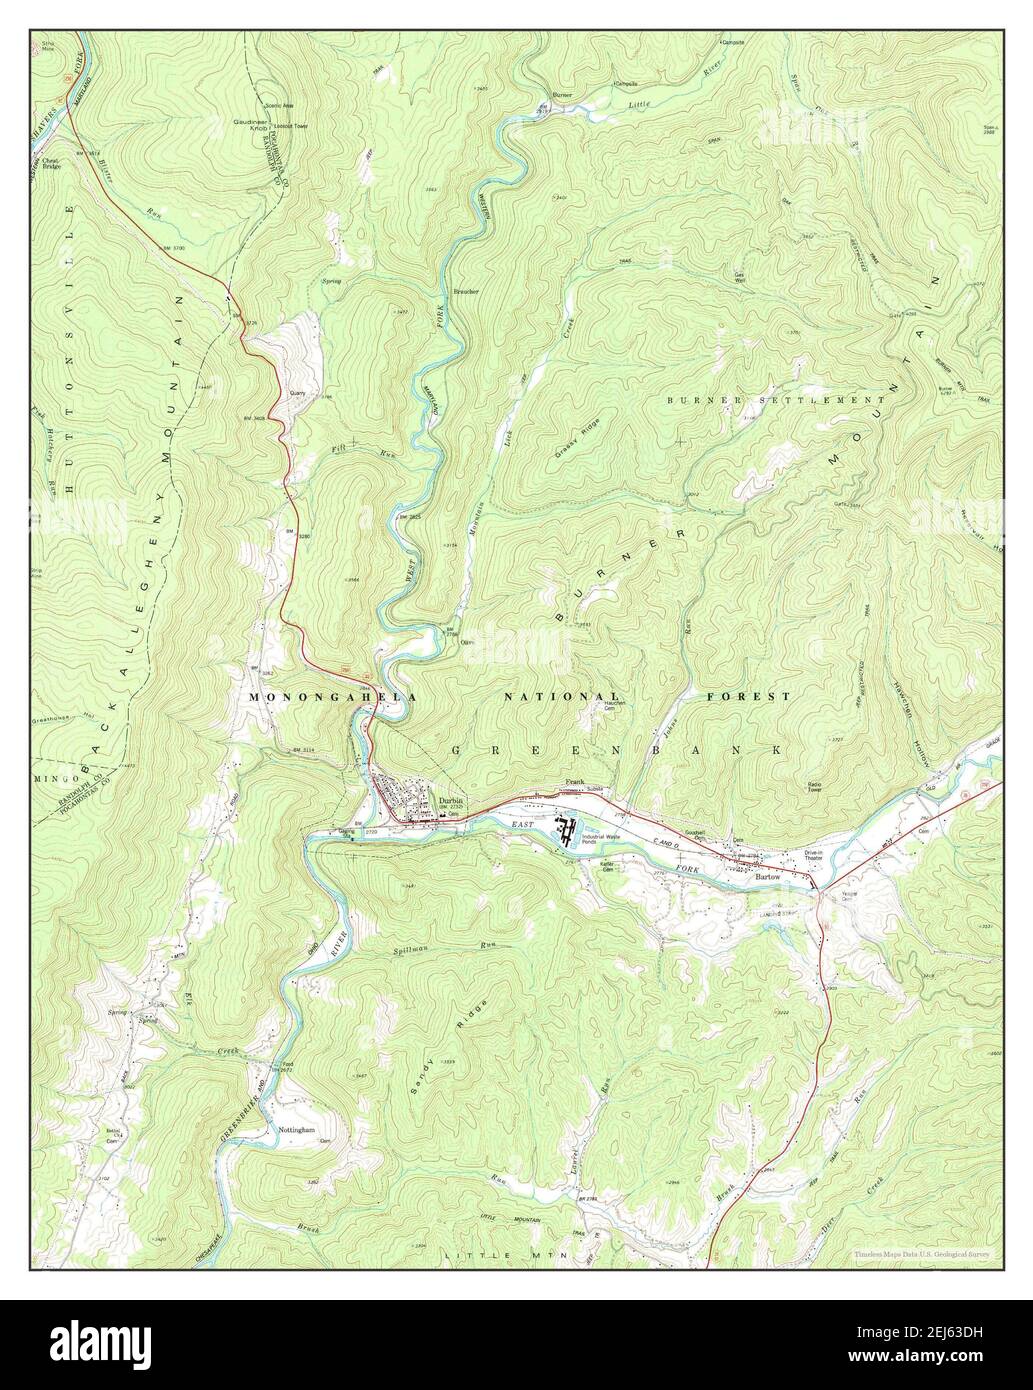 Durbin, West Virginia, map 1977, 1:24000, United States of America by Timeless Maps, data U.S. Geological Survey Stock Photo